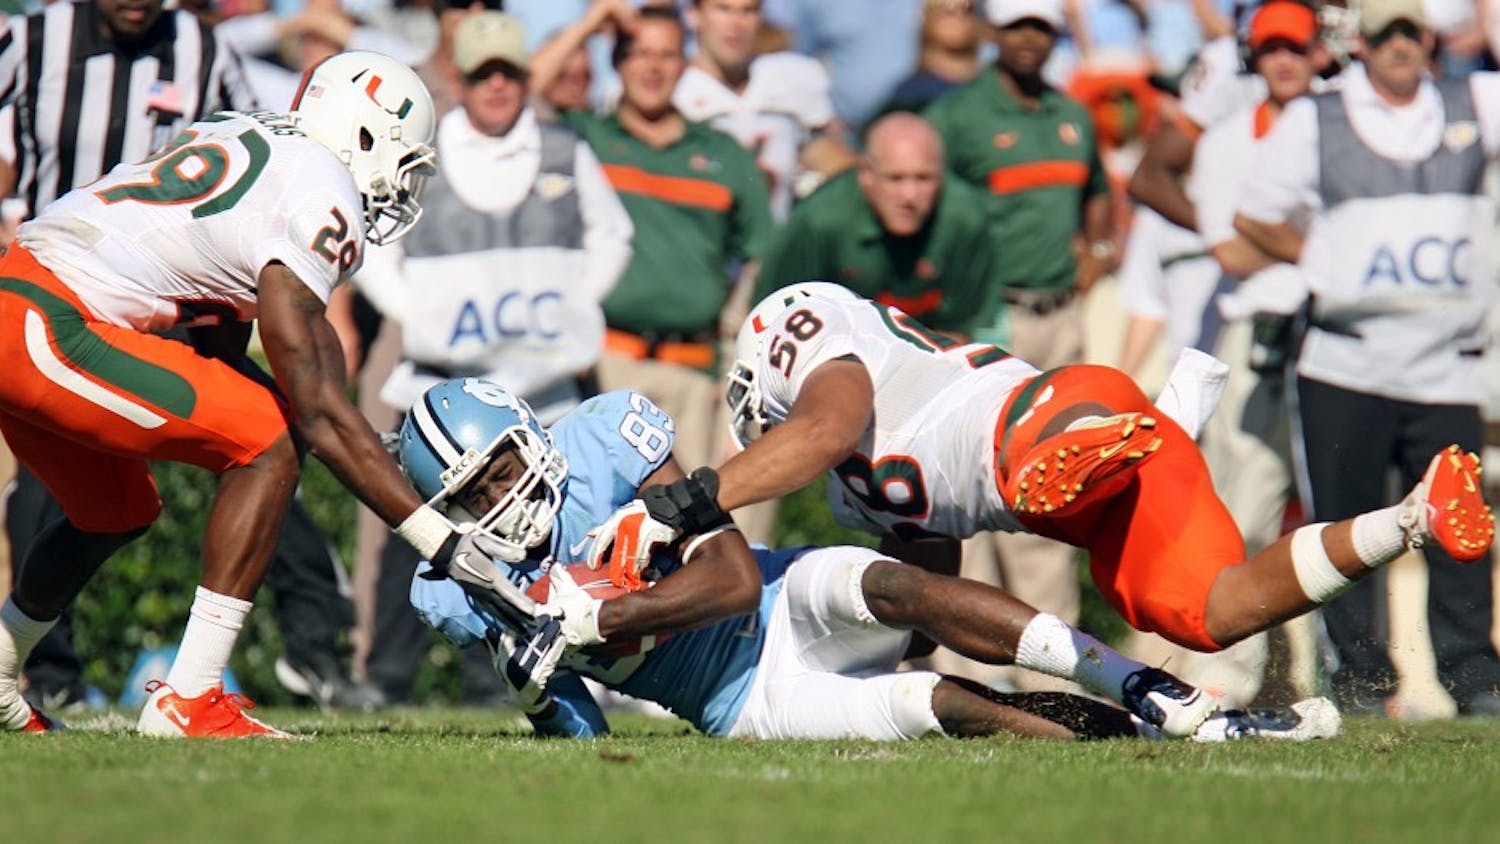 UNC wide receiver Dwight Jones is brought down by Miami's defense in the game on Saturday. UNC lost to Miami 30-24. 